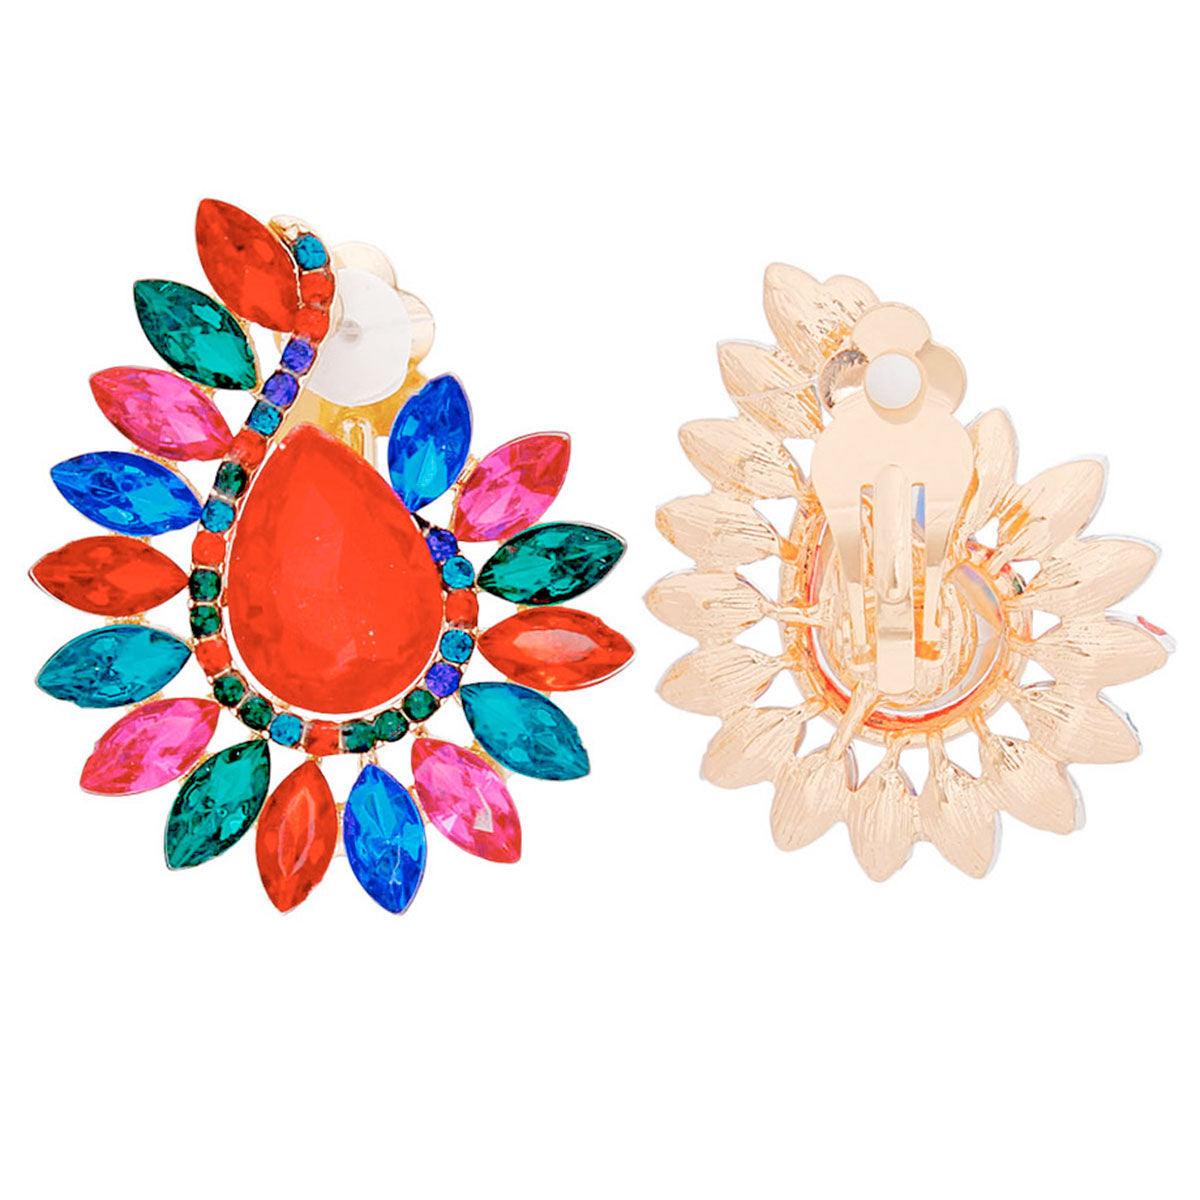 Colorful Teardrop Red Center Clip On Pageant Earrings for Elegant Style